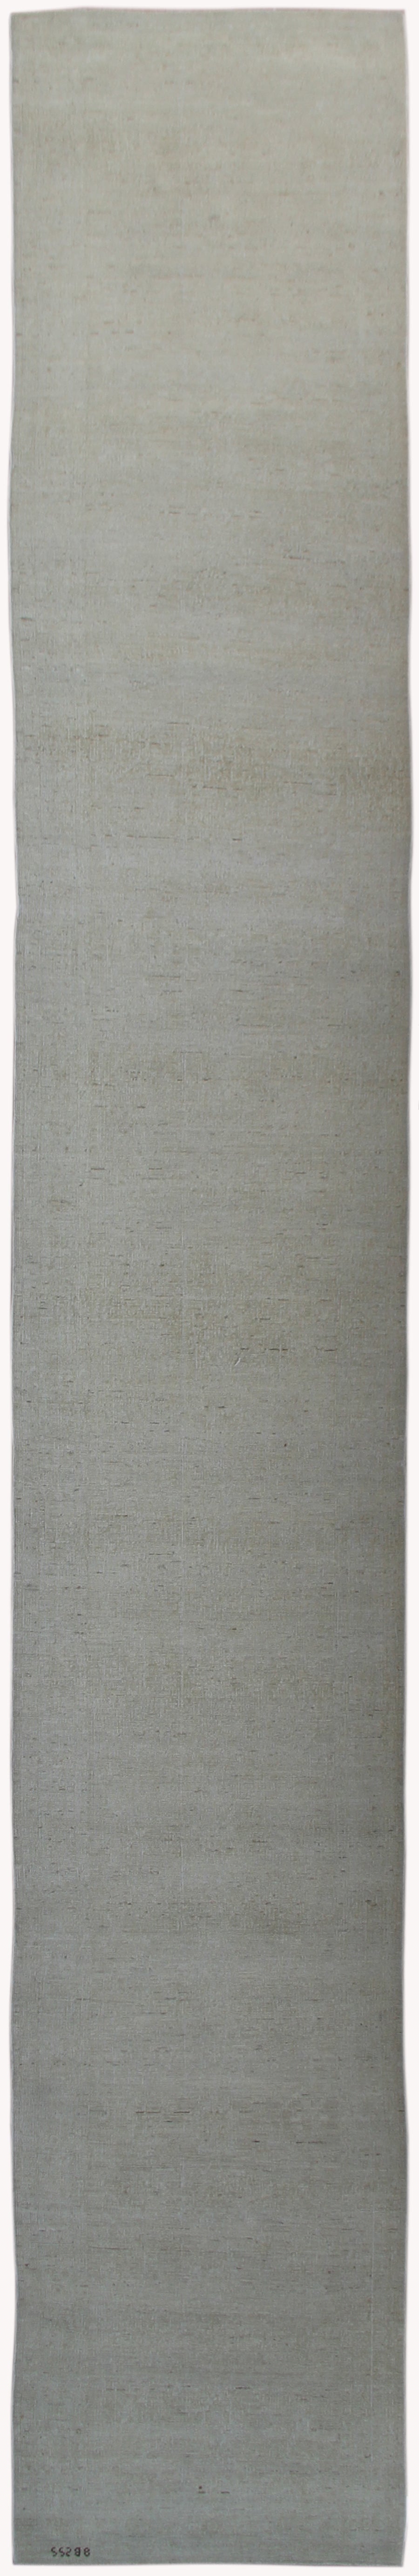 3x20 Very Pale Washed-out Agra Design Ariana Traditional Runner Rug